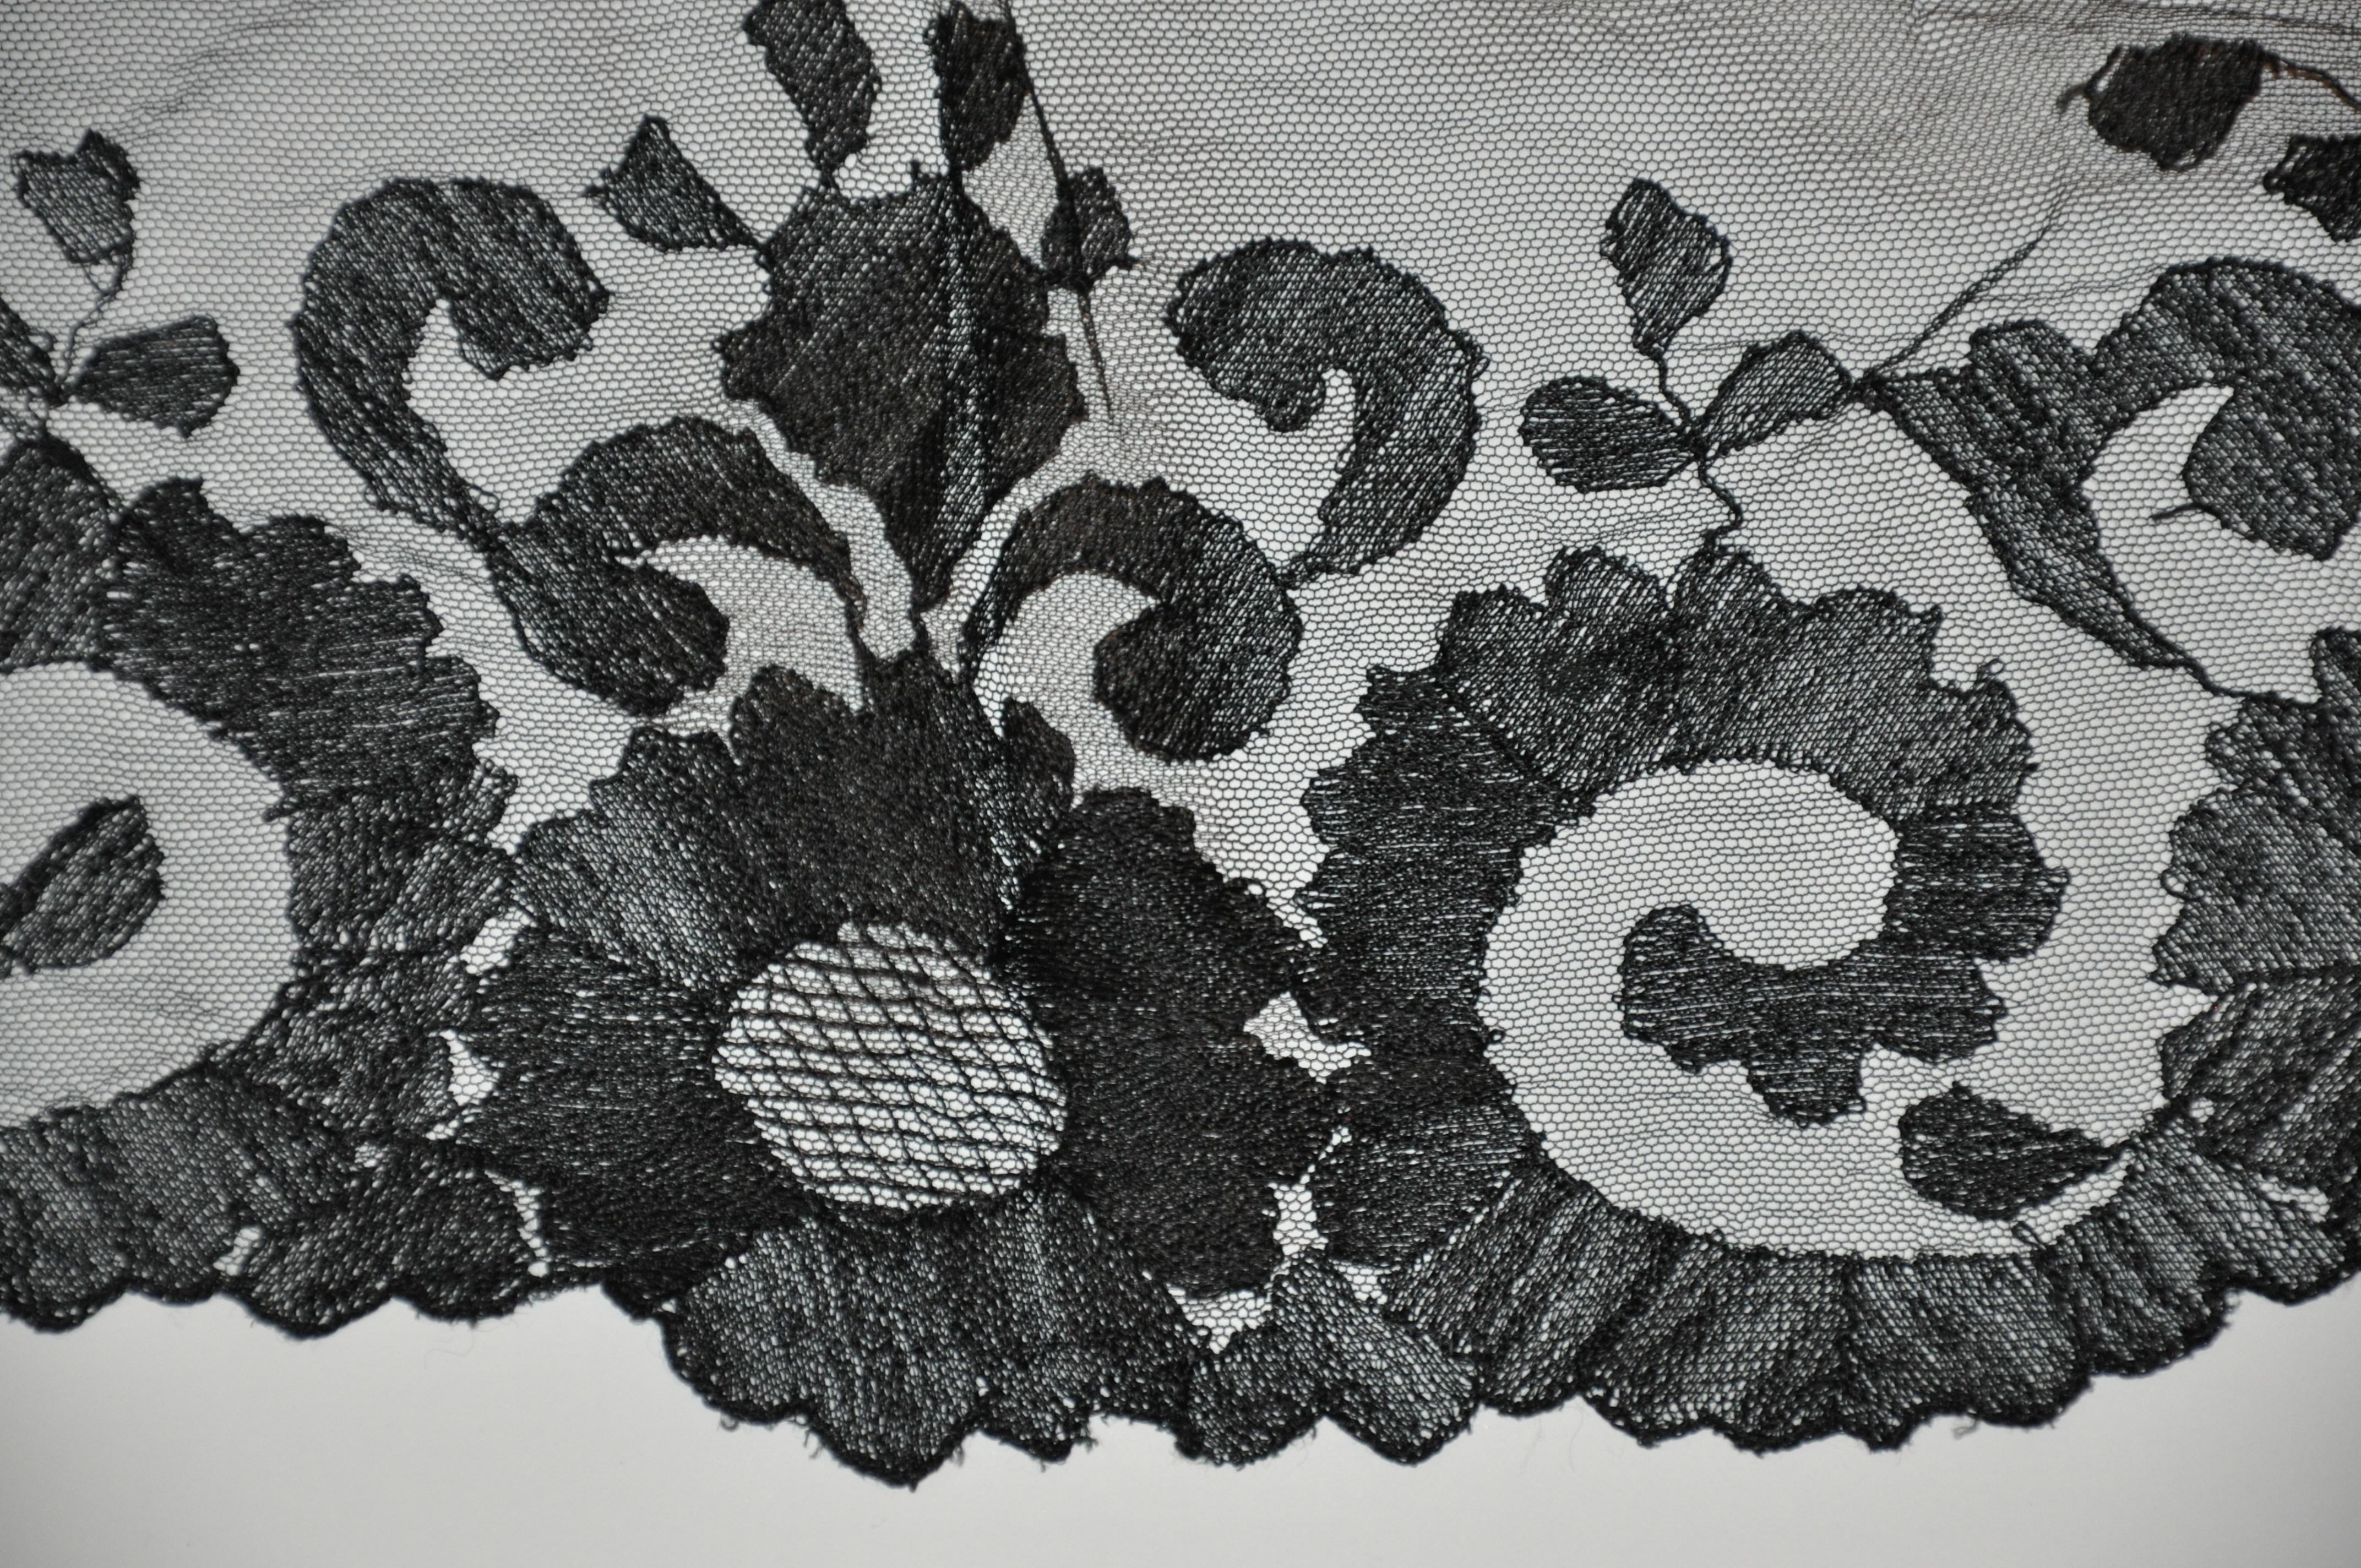 Women's or Men's Rare Black Hand-Woven French Lace with Scallop Edges Shawl For Sale